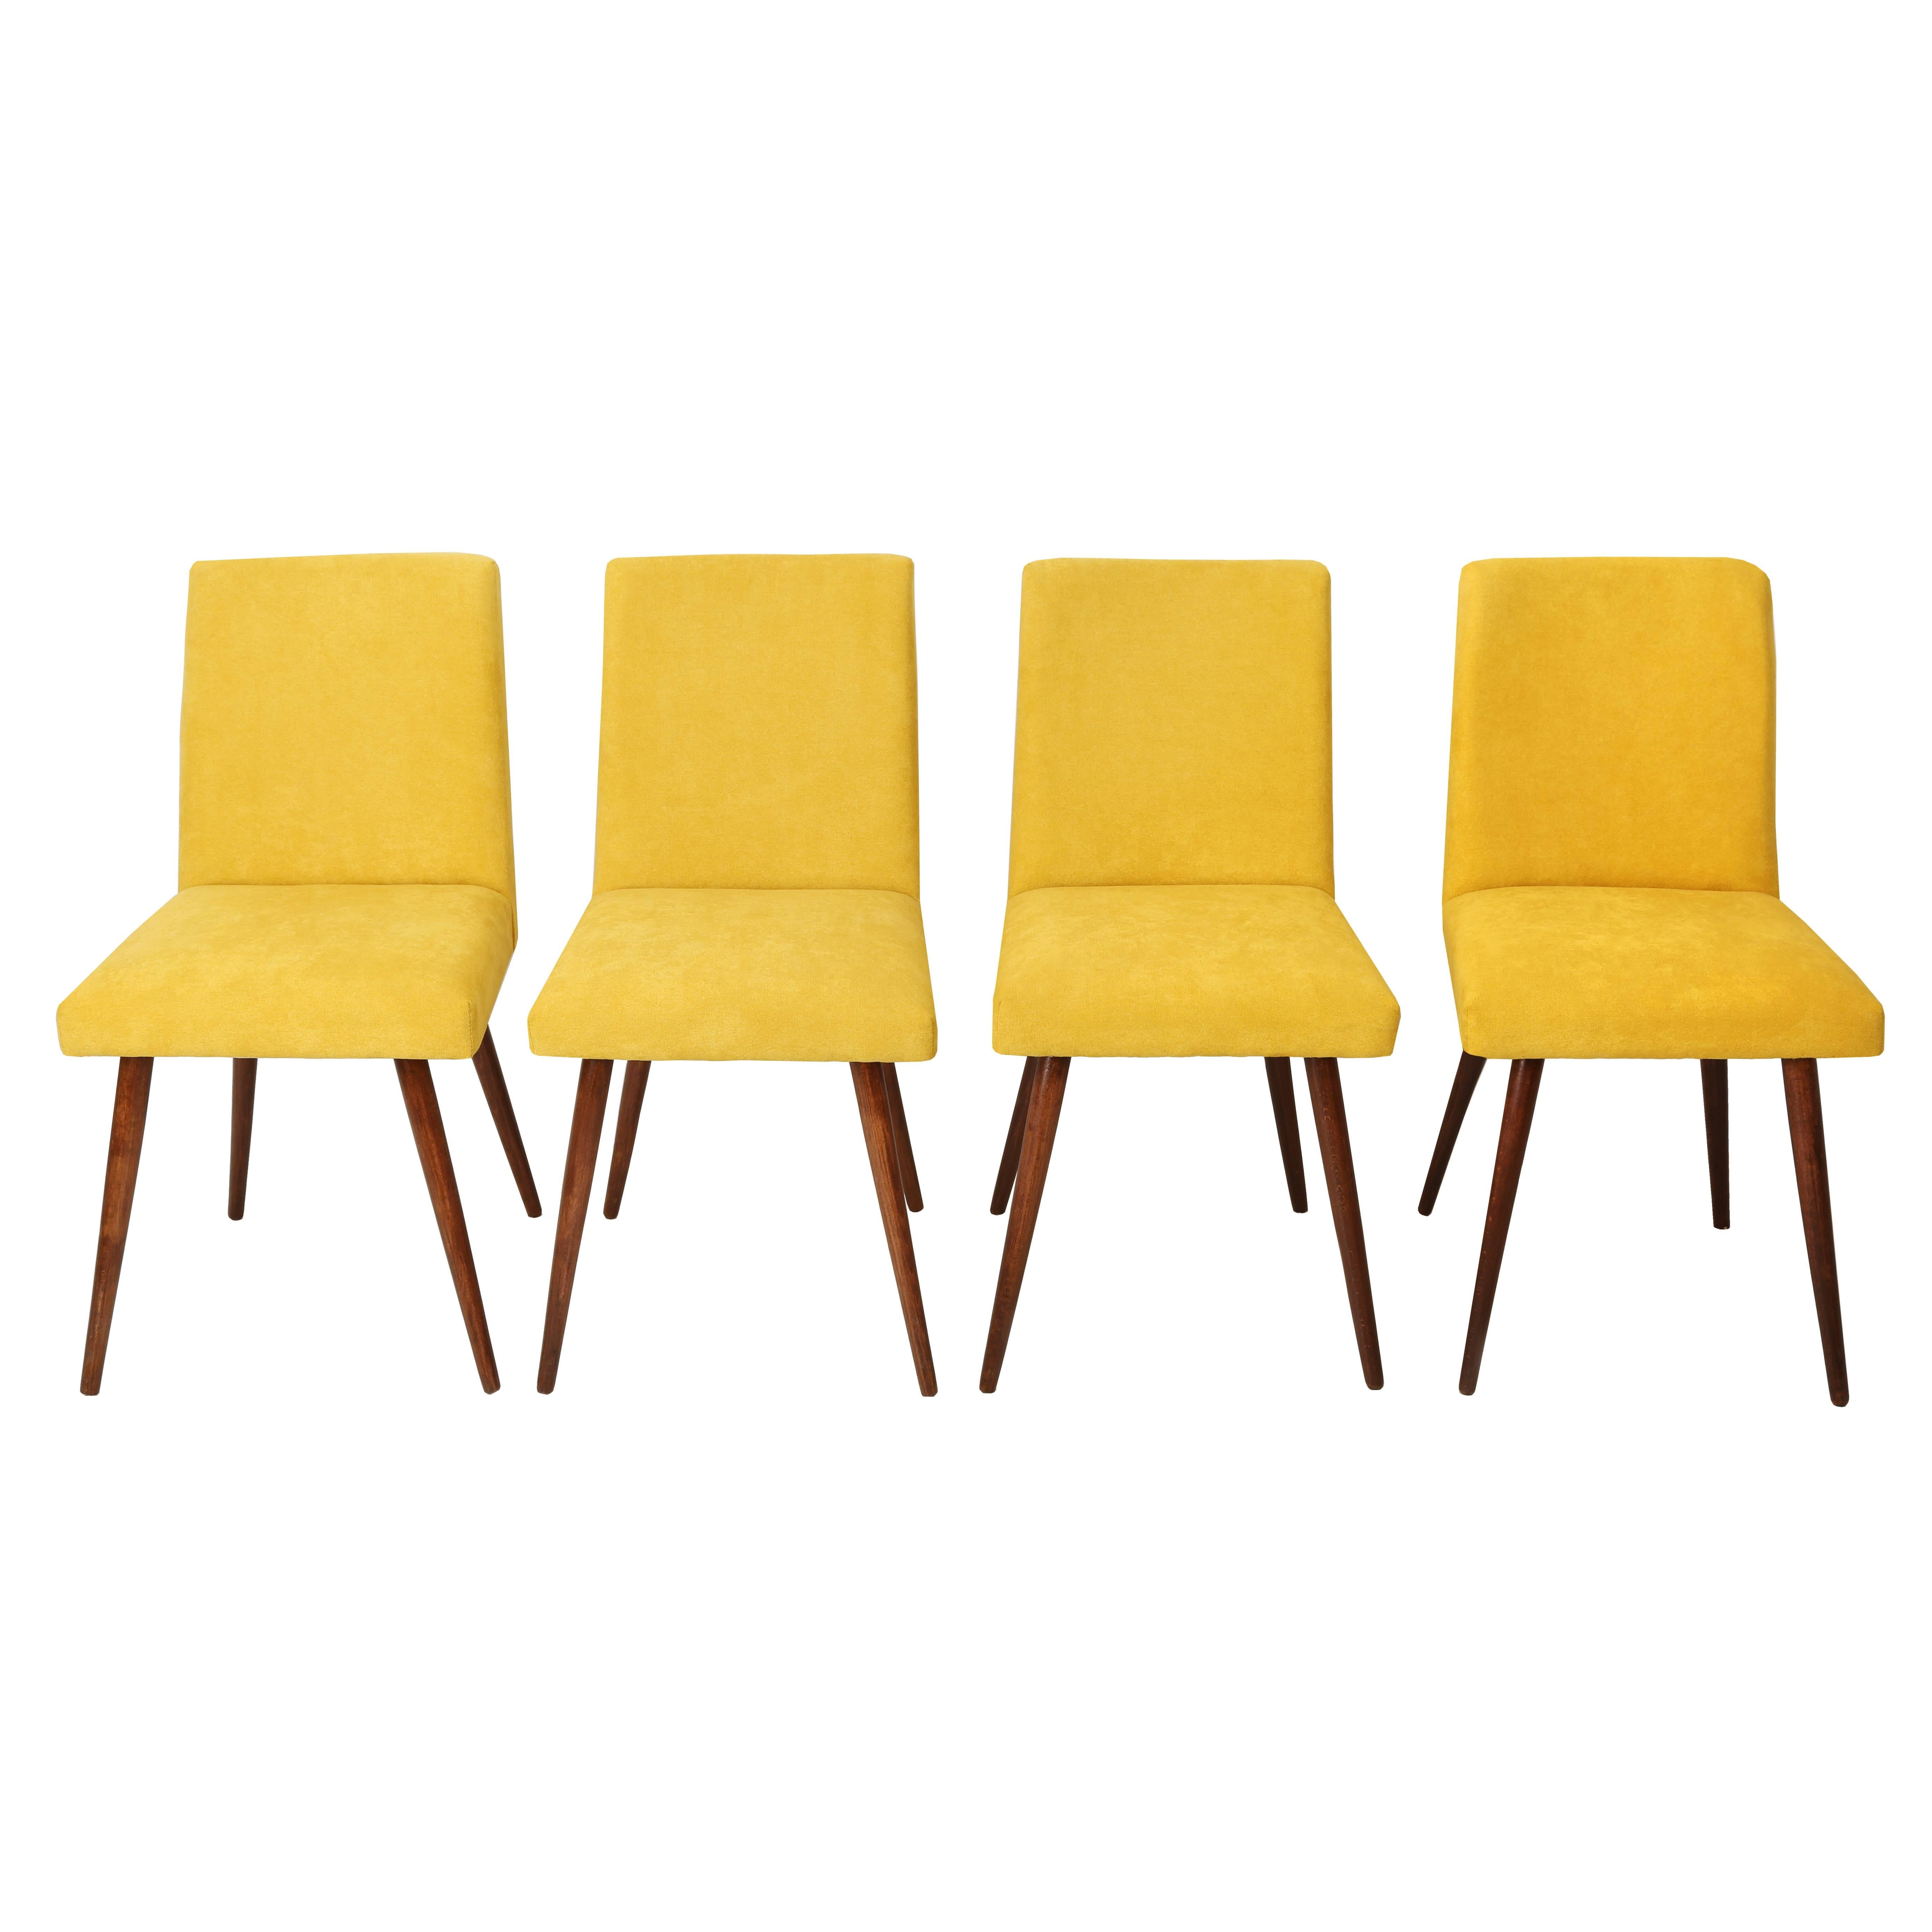 Set of Four Mid Century Yellow Chairs, Europe, 1960s. For Sale